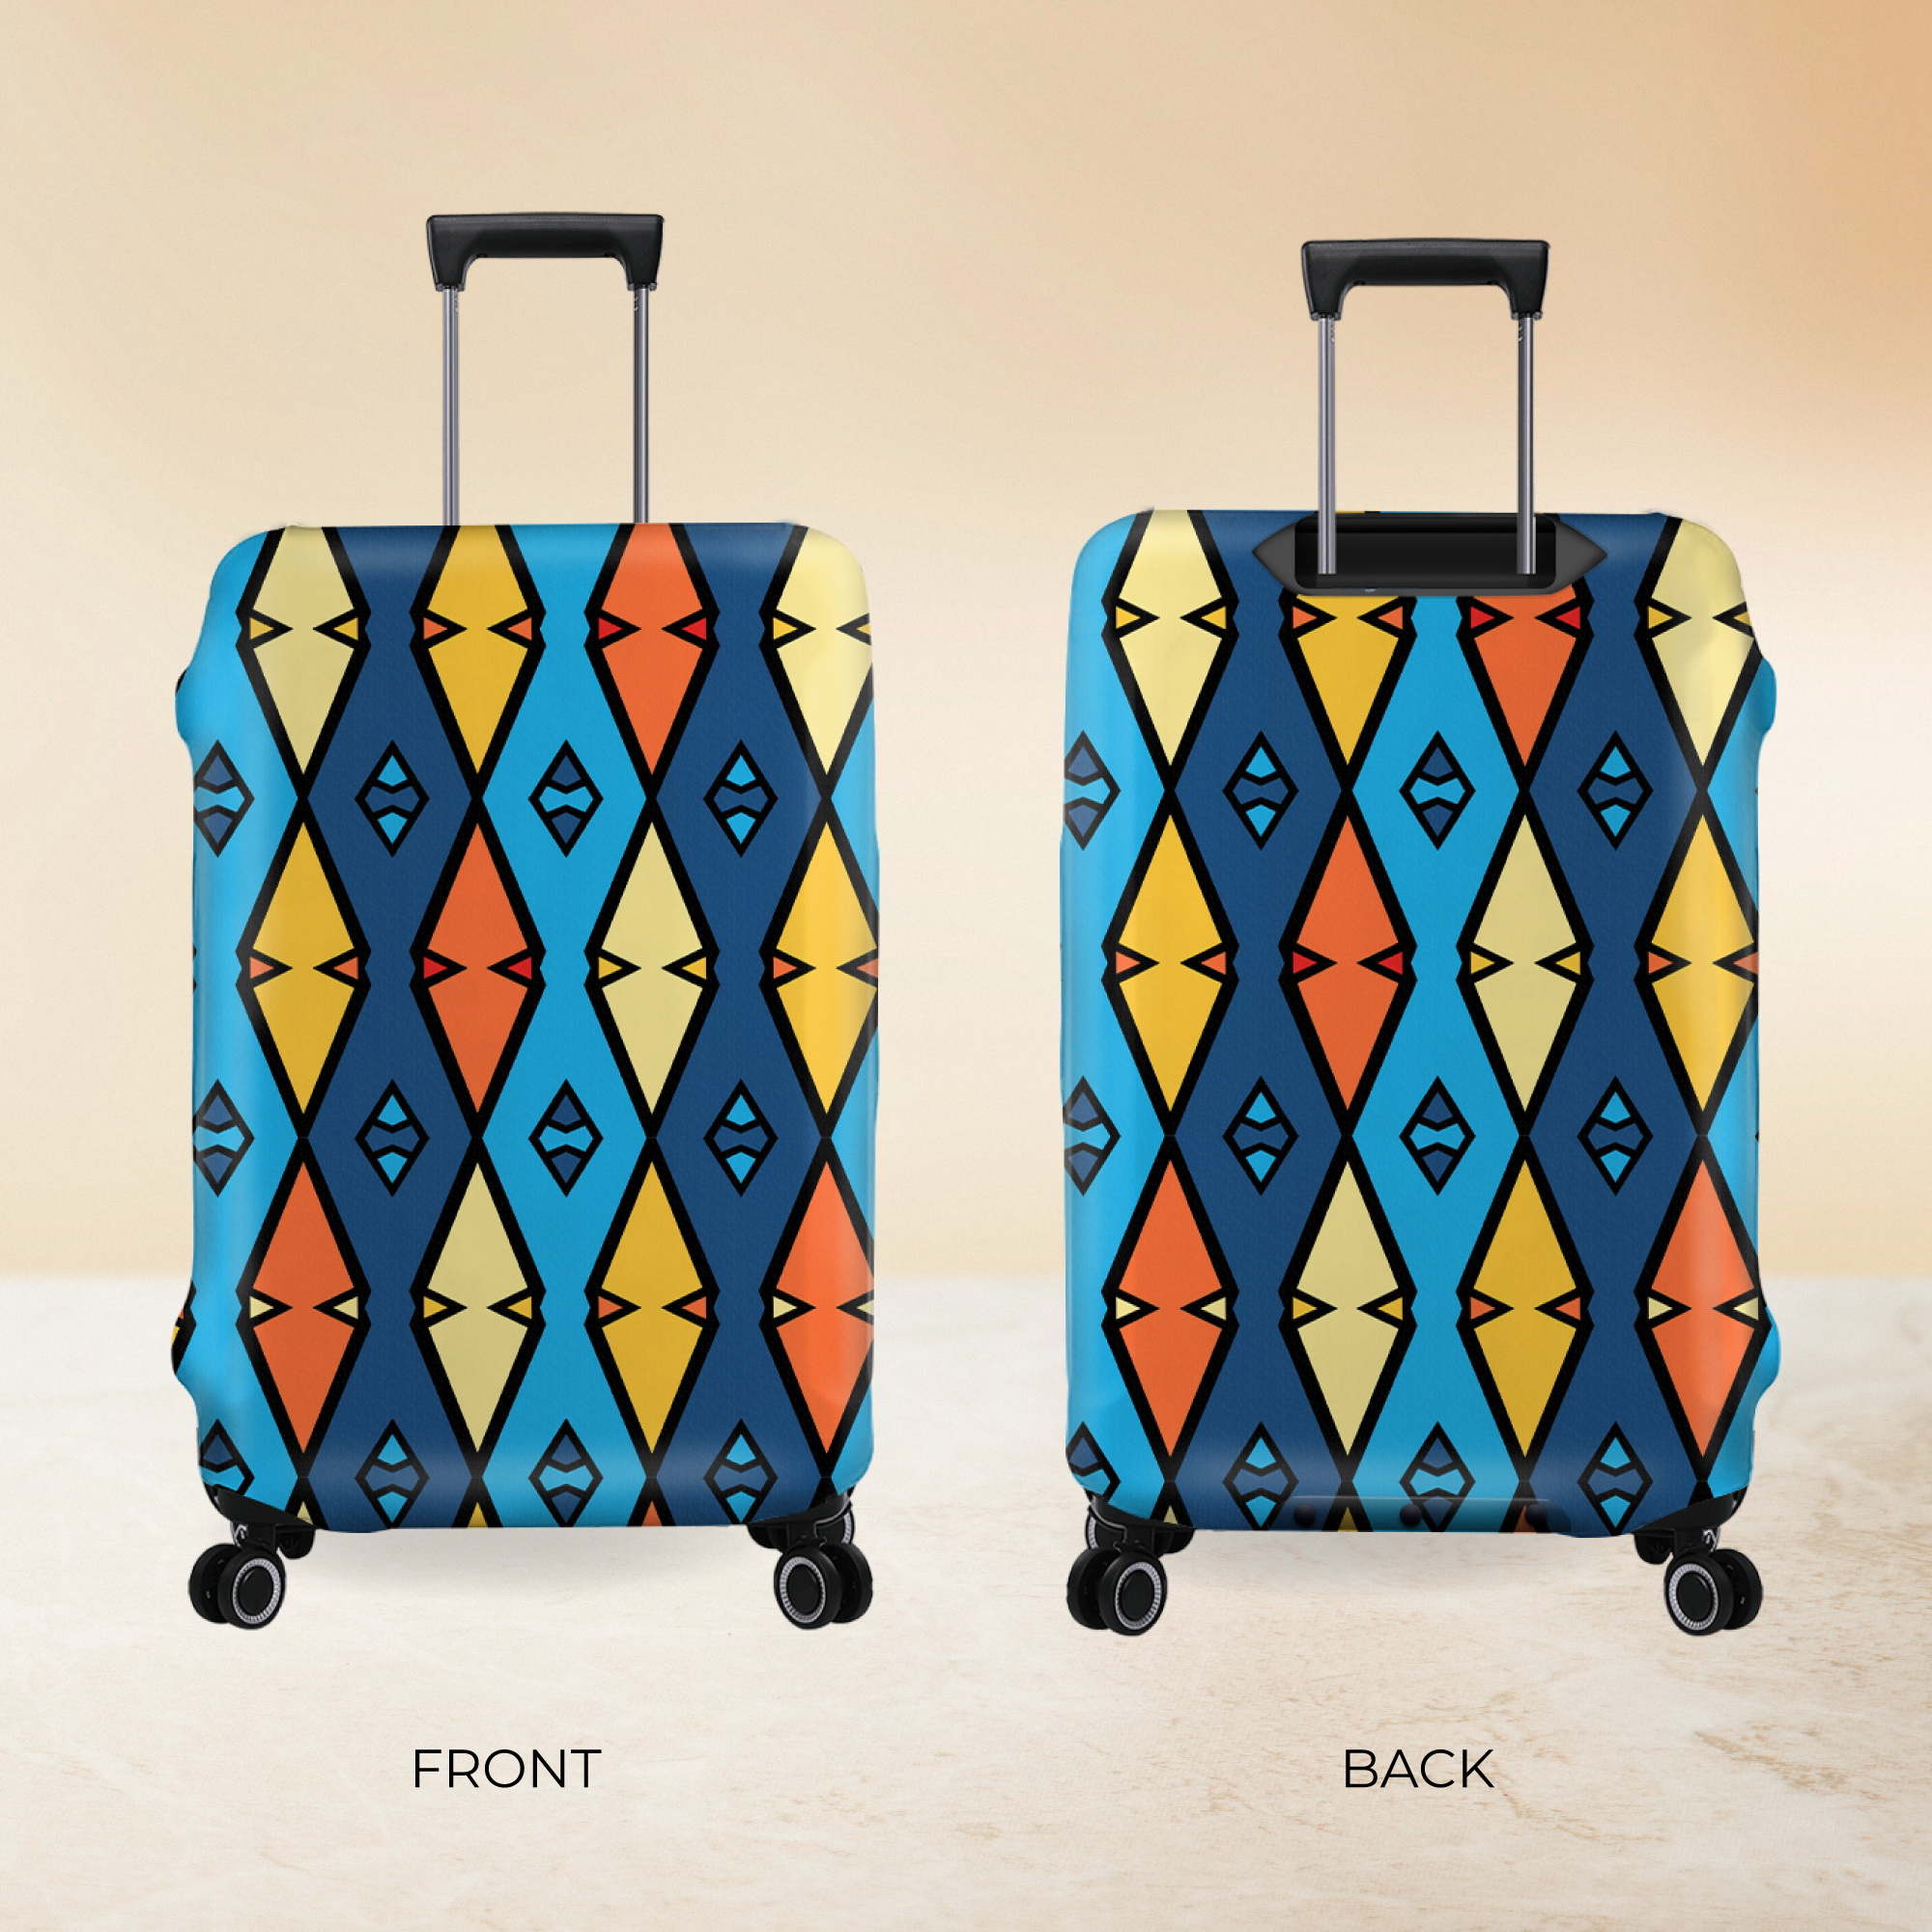 Luggage Cover Pattern Design